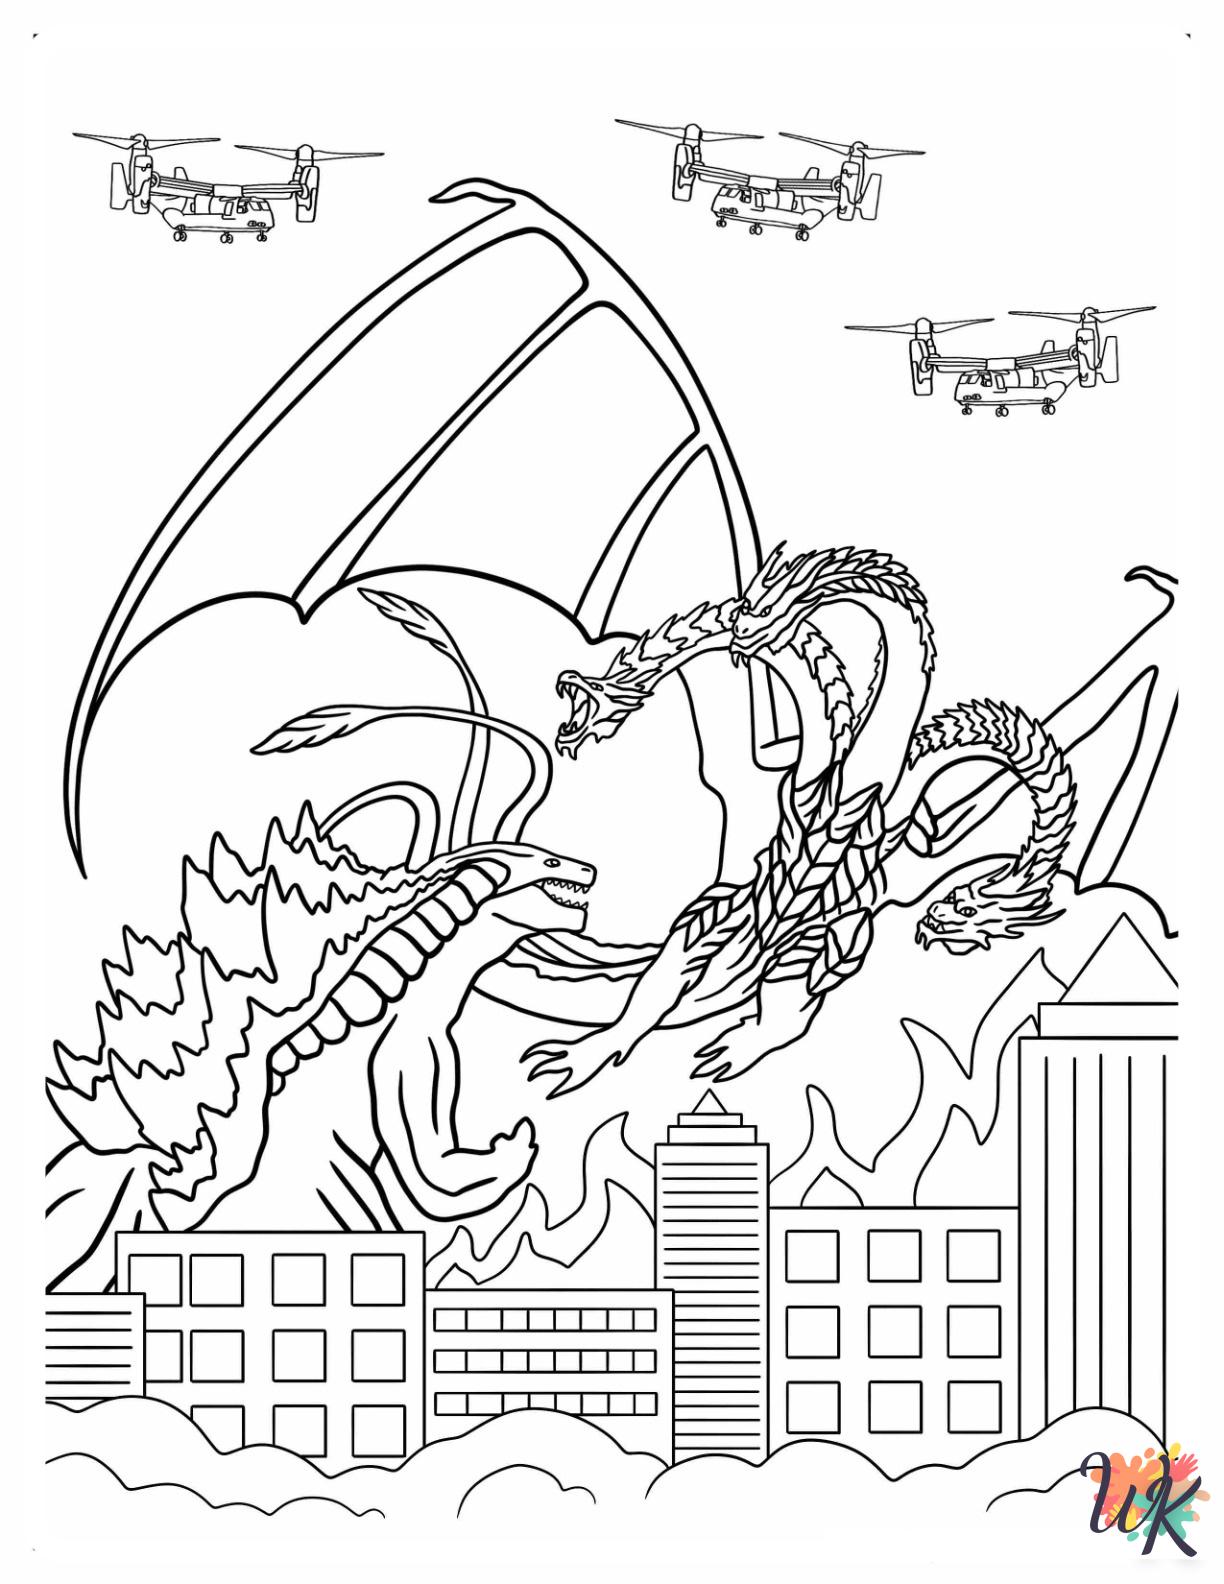 detailed Godzilla coloring pages for adults